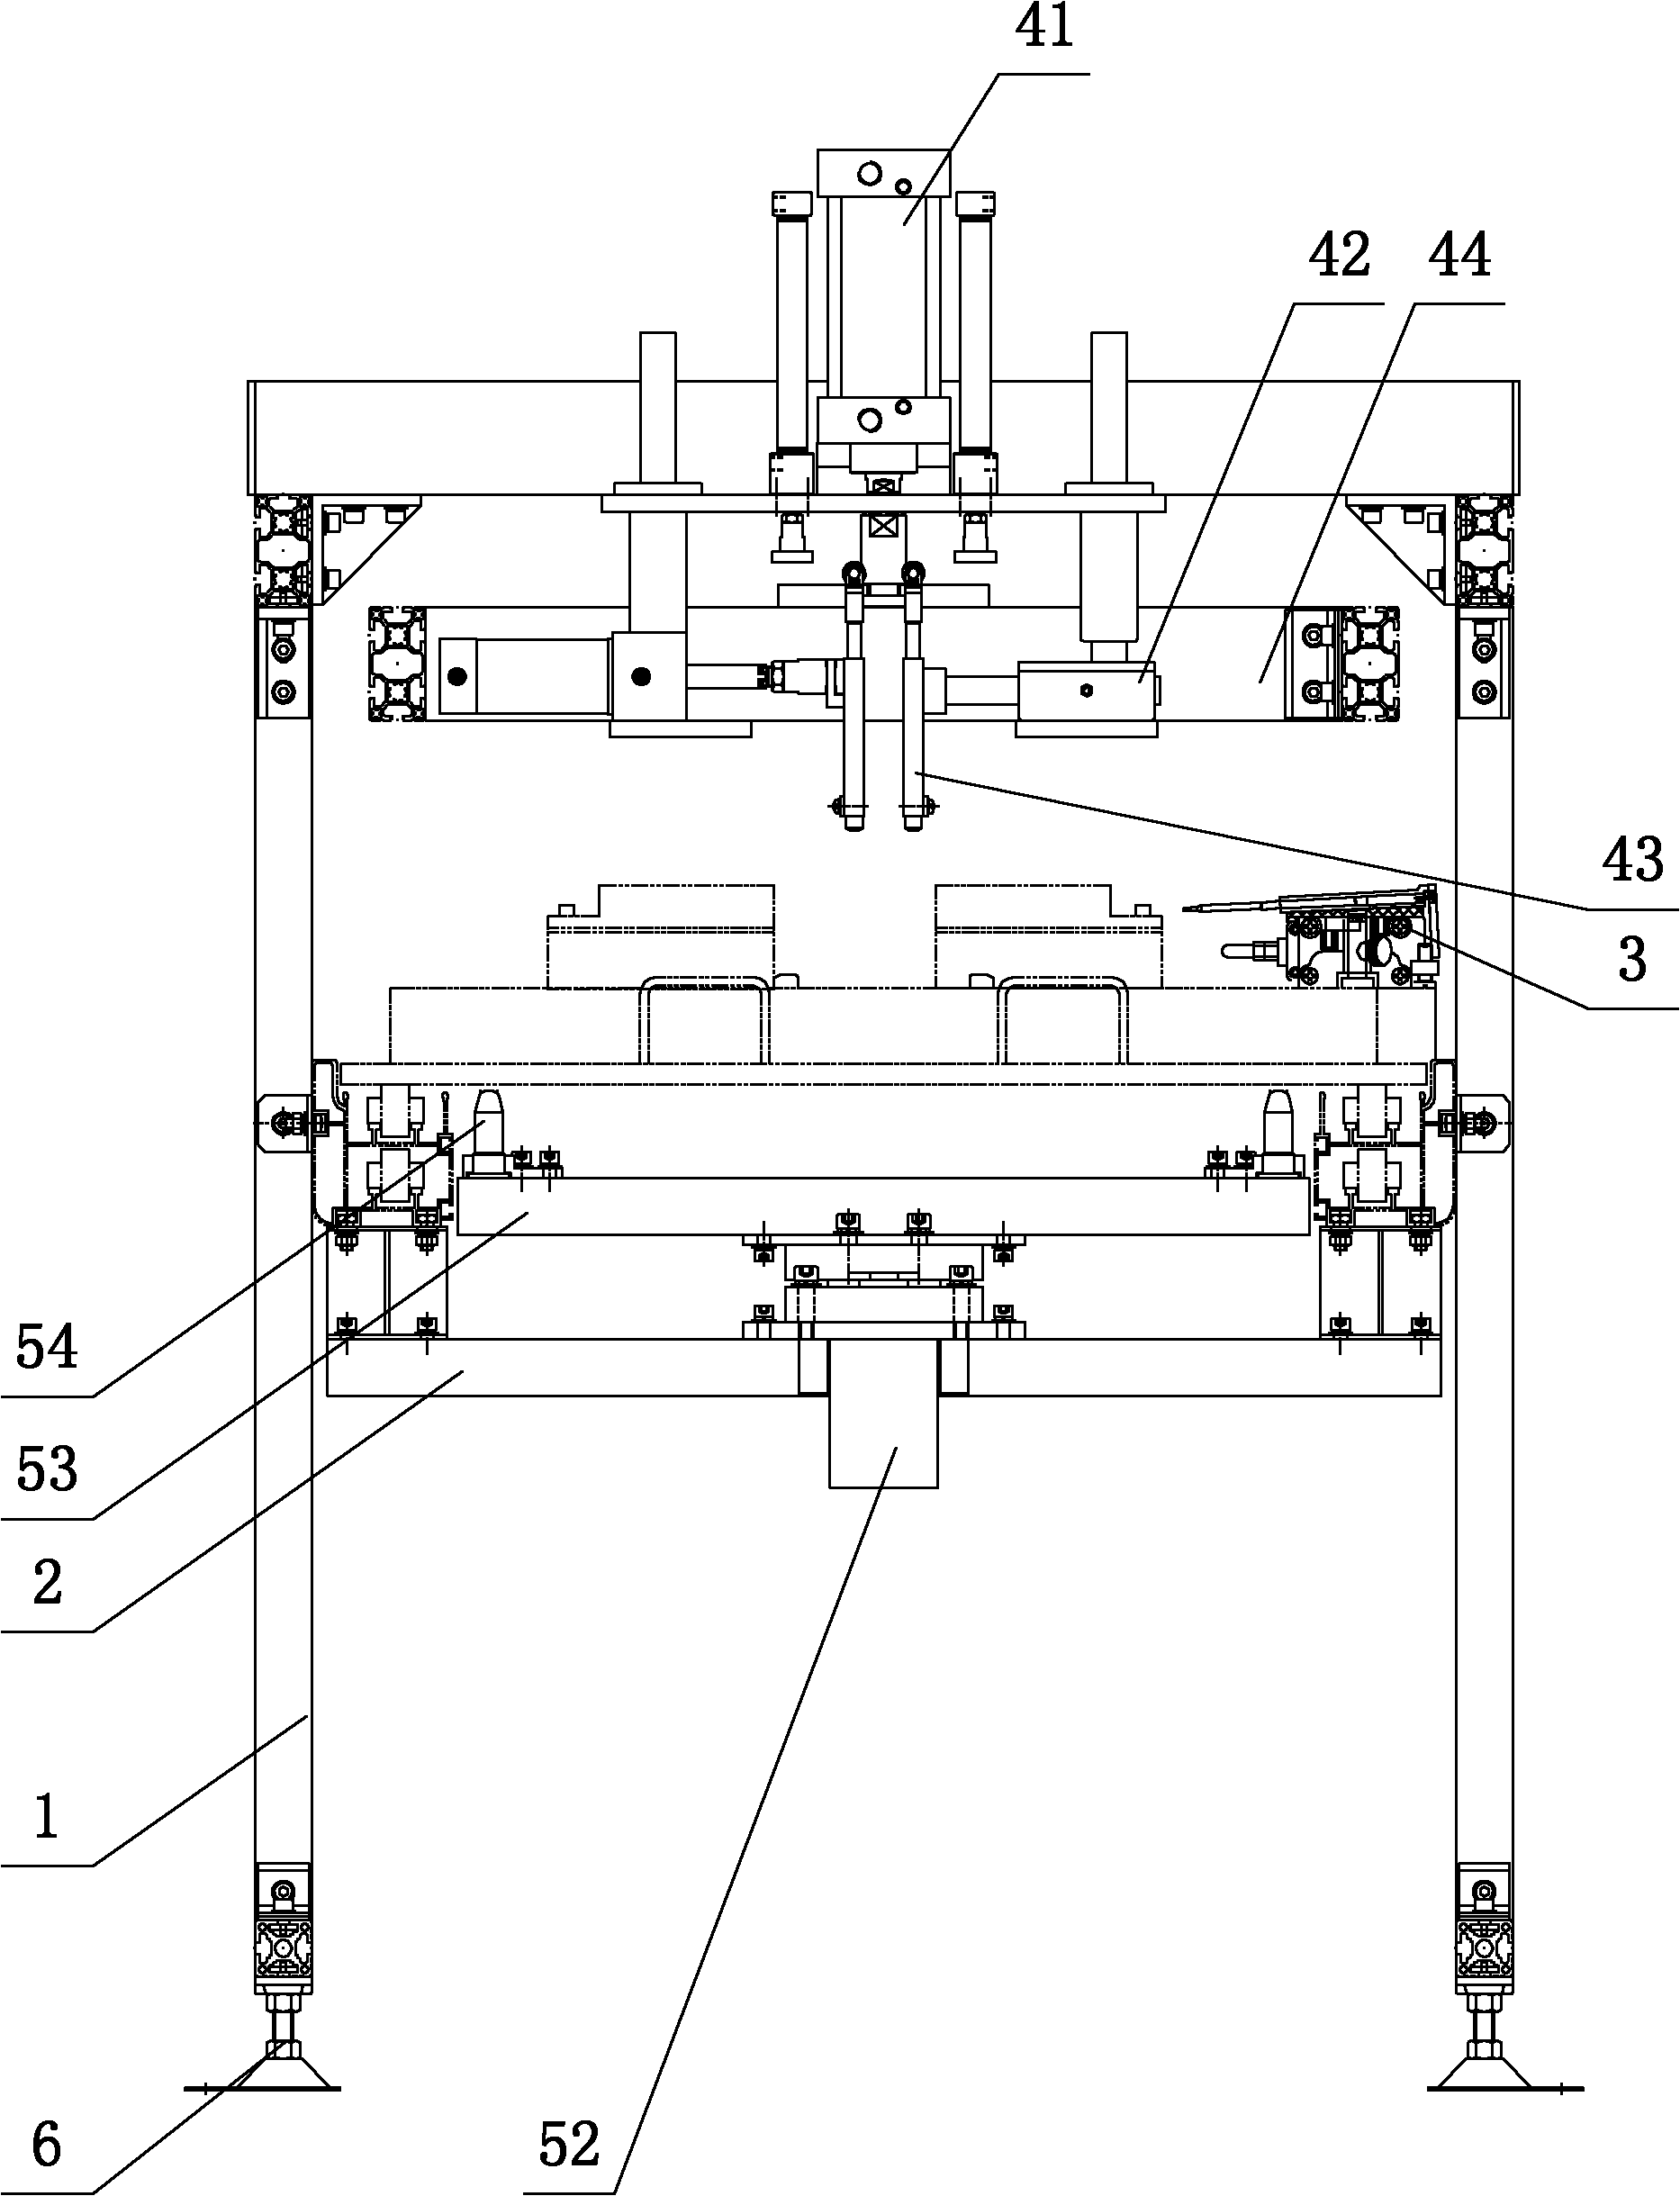 Terminal combined type automatic wire connecting and disconnecting device for electric energy meter